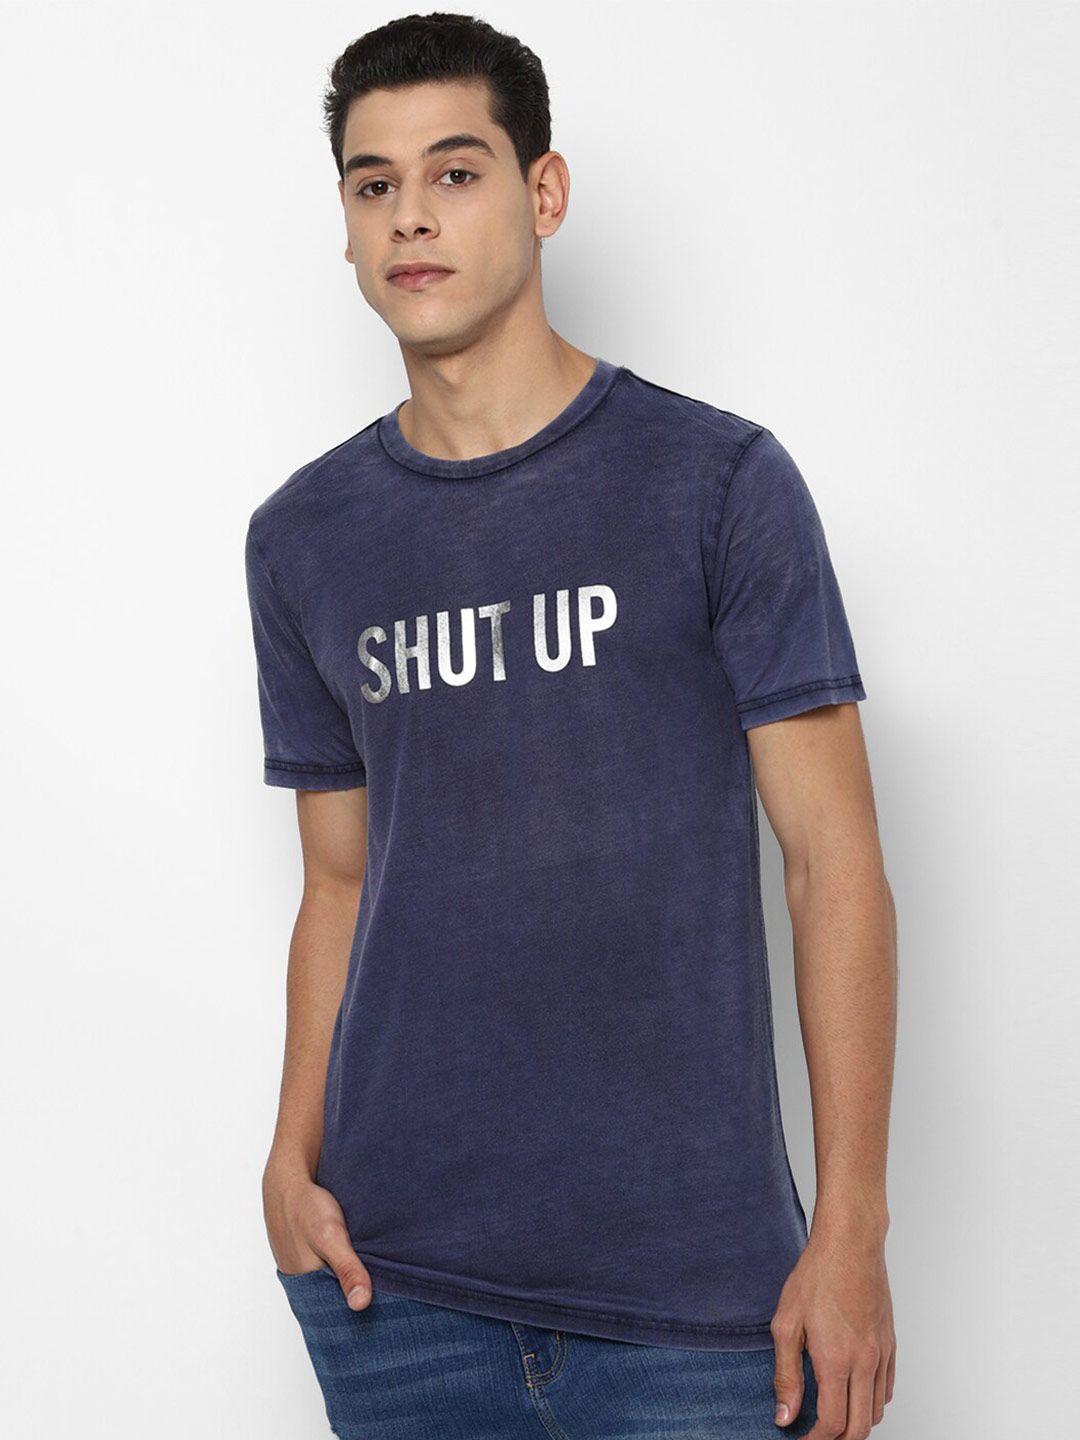 forever-21-men-navy-blue-typography-printed-t-shirt